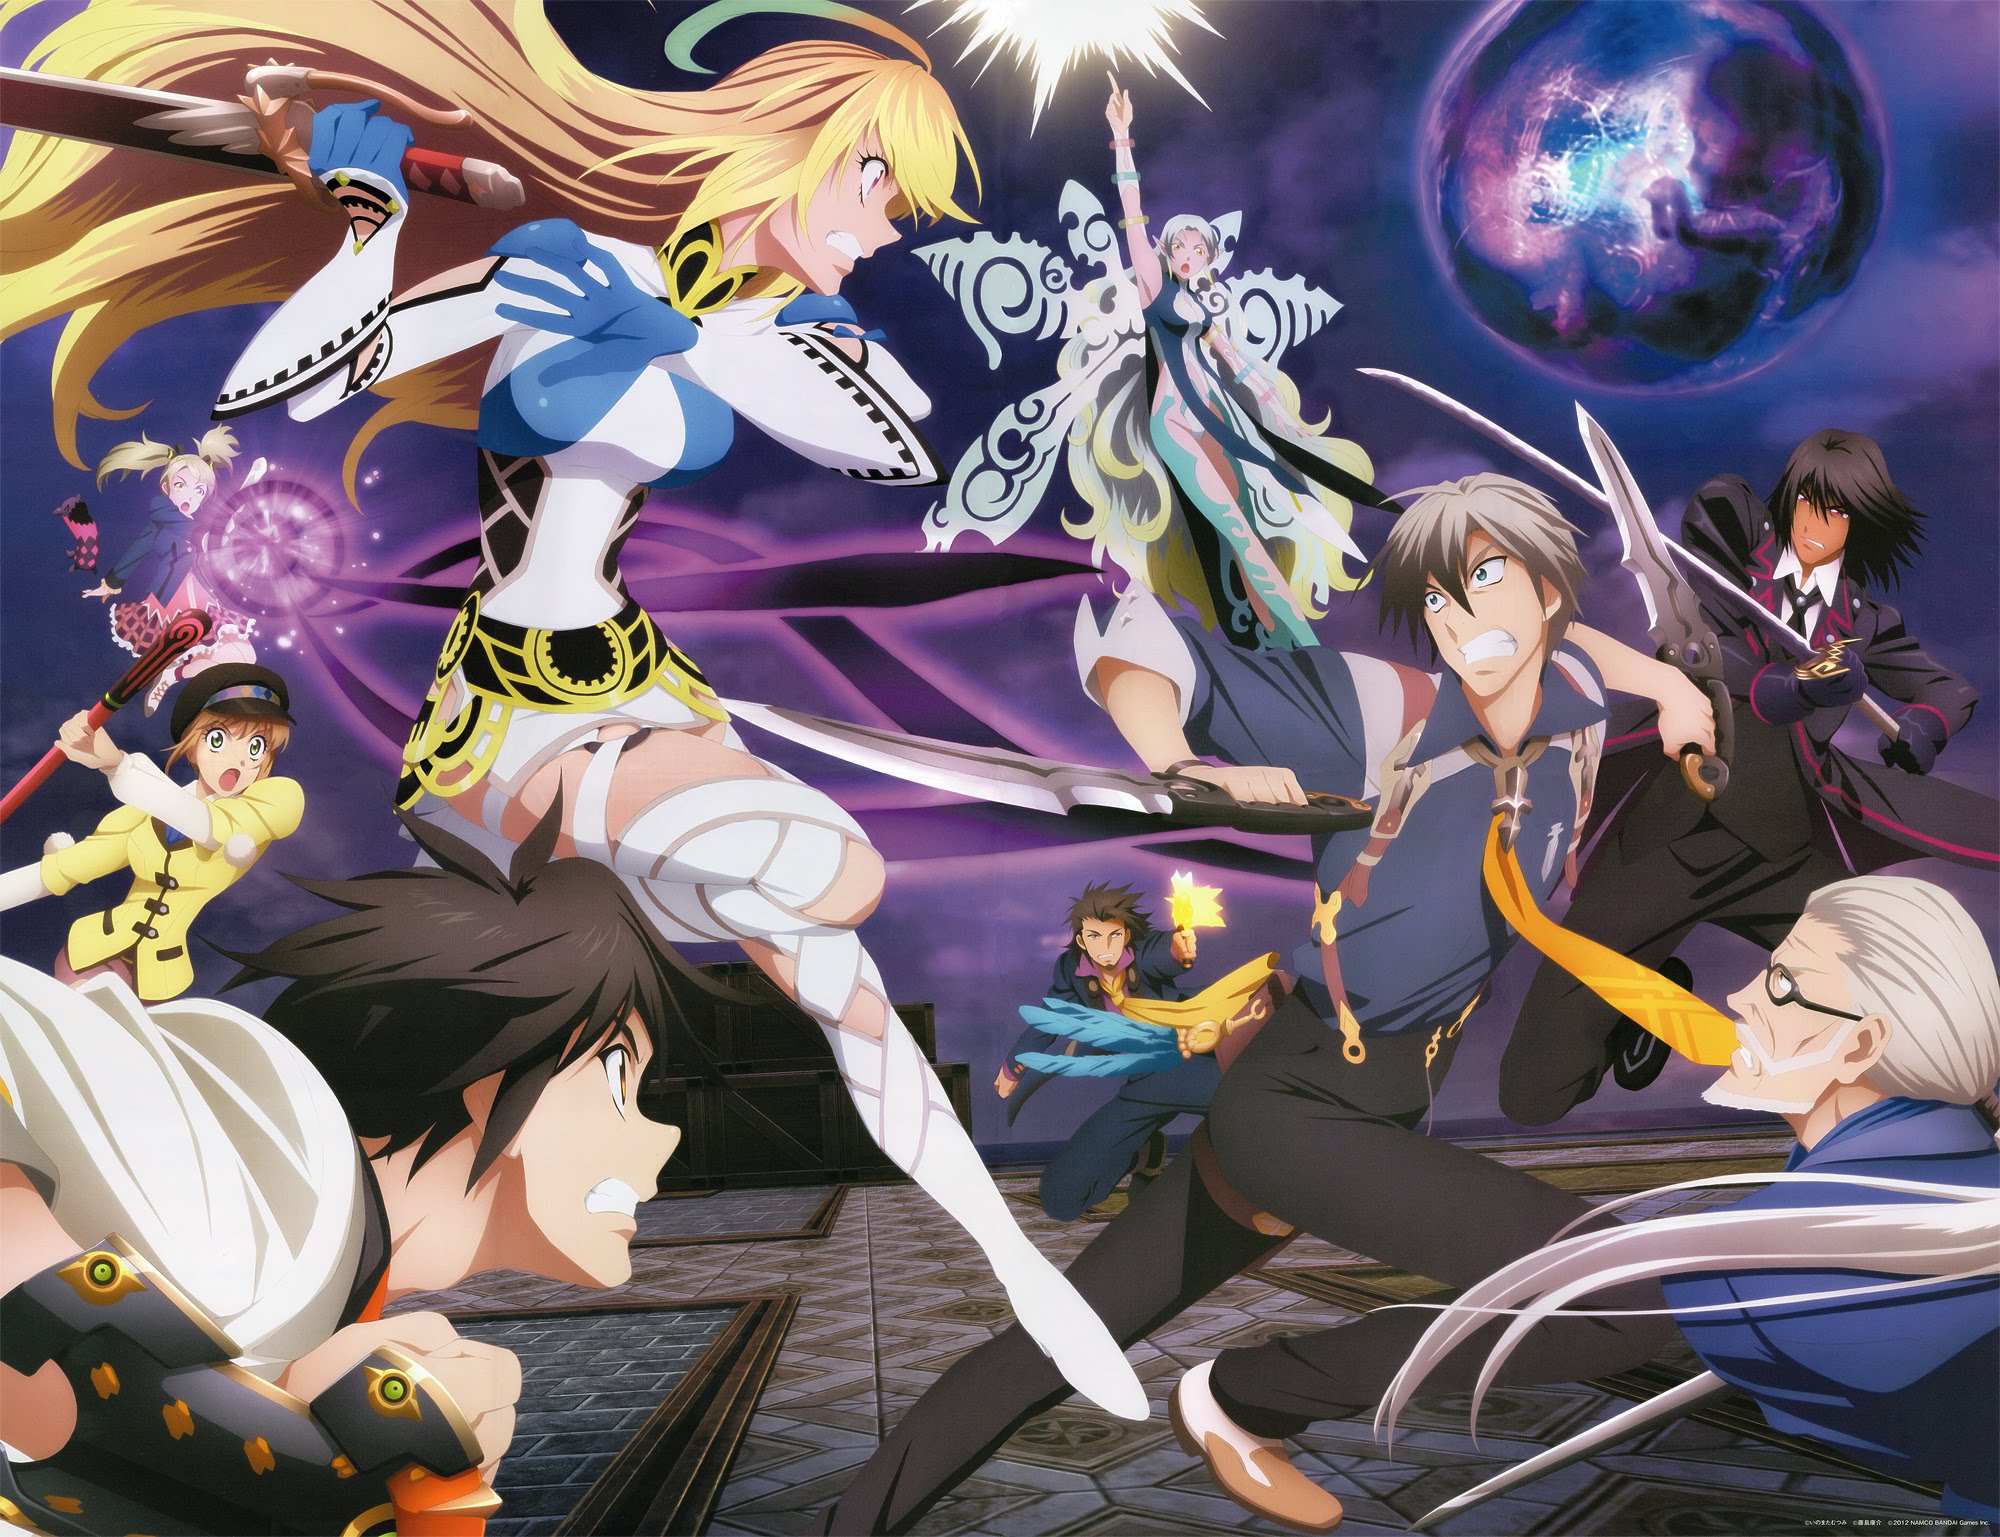 Tales Of Xillia 2 Backgrounds, Compatible - PC, Mobile, Gadgets| 2000x1537 px